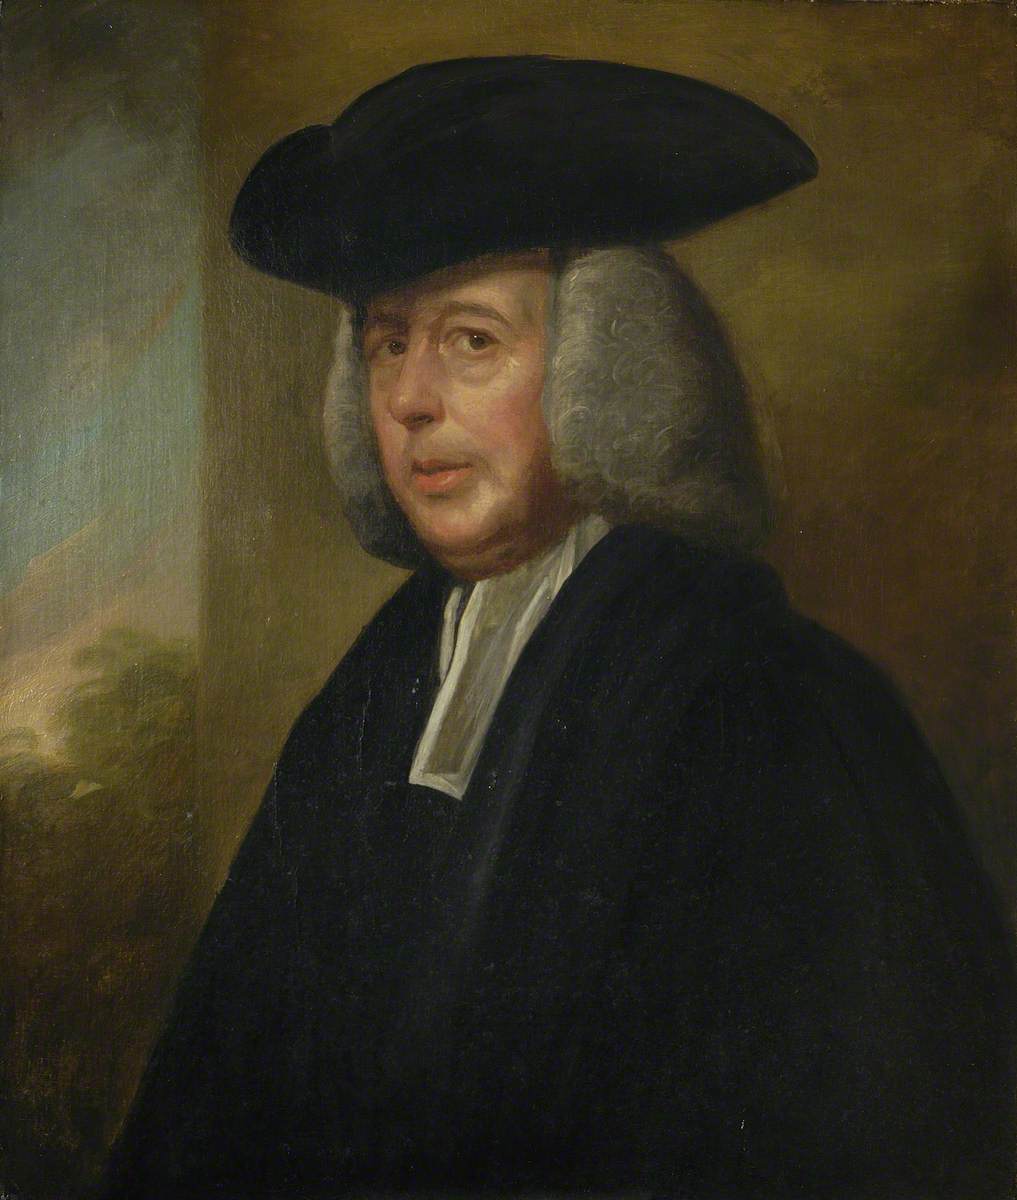 Thomas Broughton (1712–1777), Secretary of the Society for Promoting Christian Knowledge